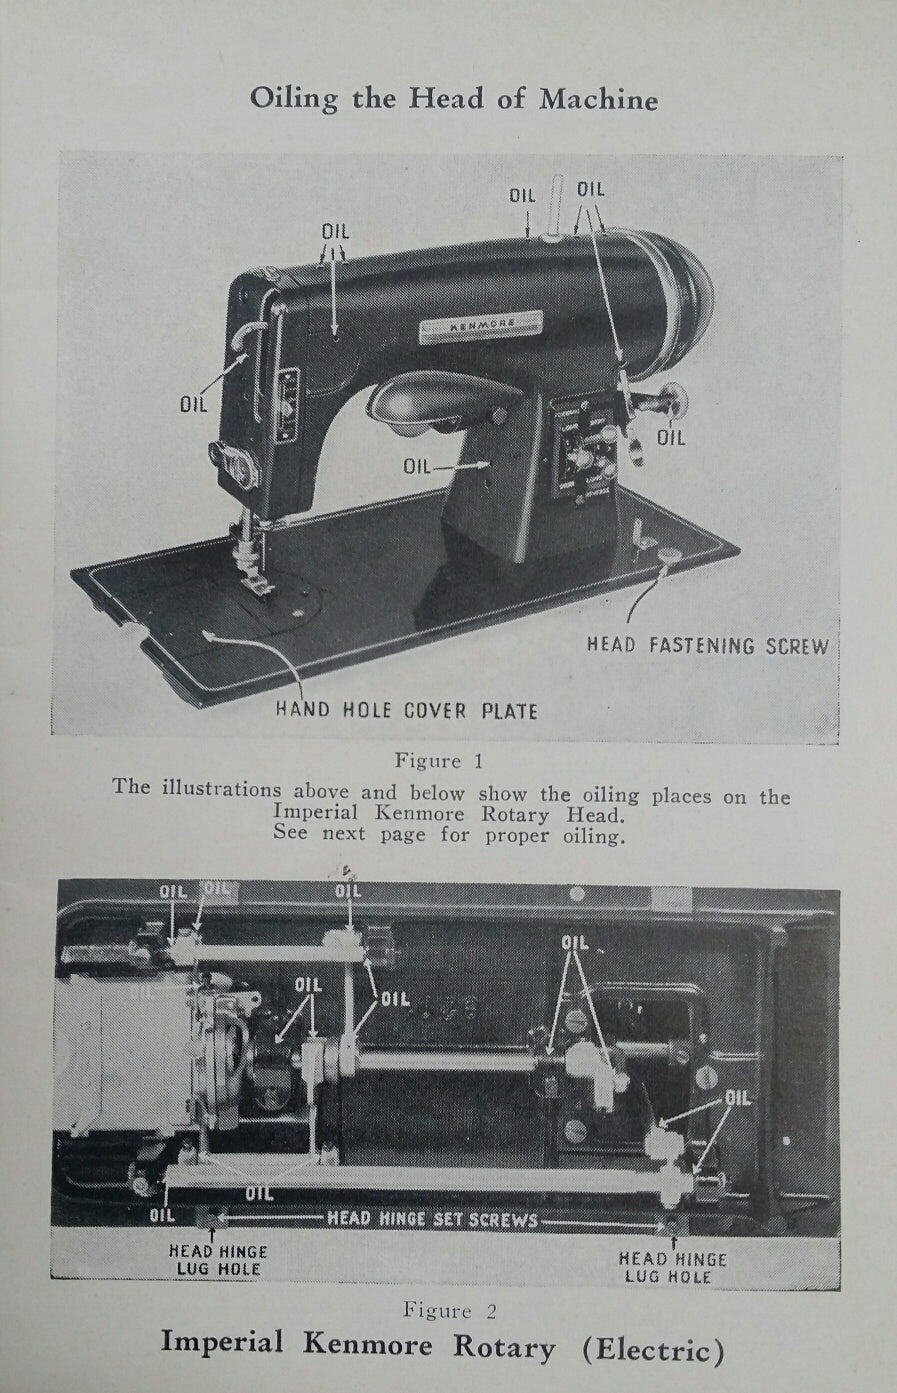 Instruction Book, Kenmore Model 120.491 - mrsewing